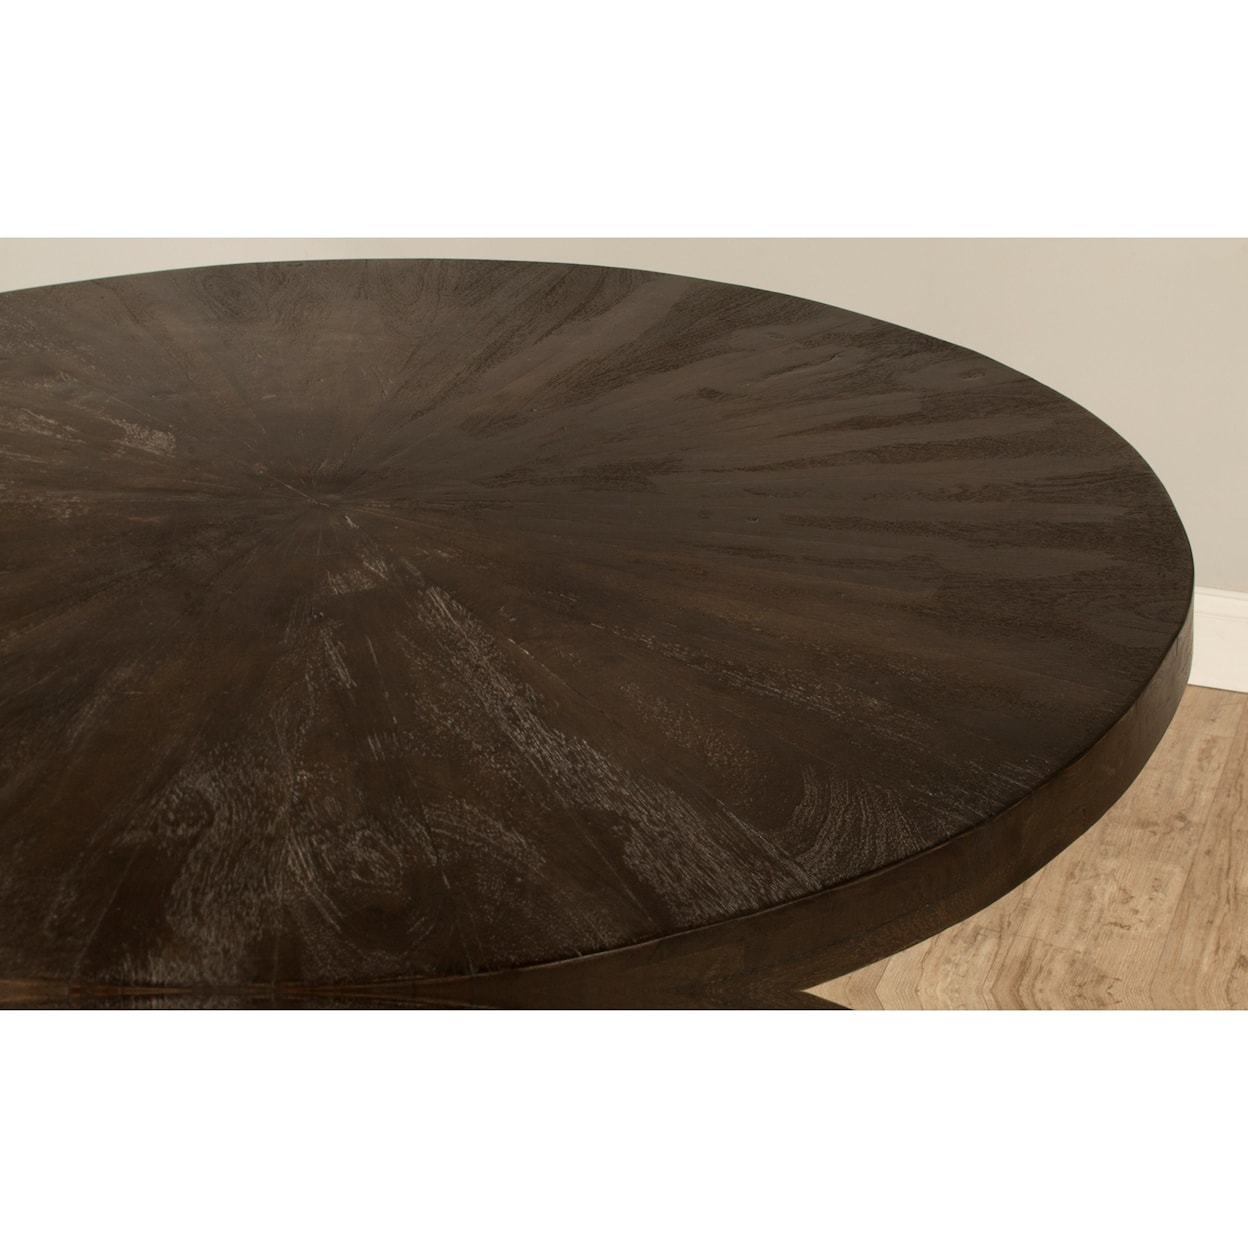 Hillsdale Kanister Round Counter-Height Dining Table